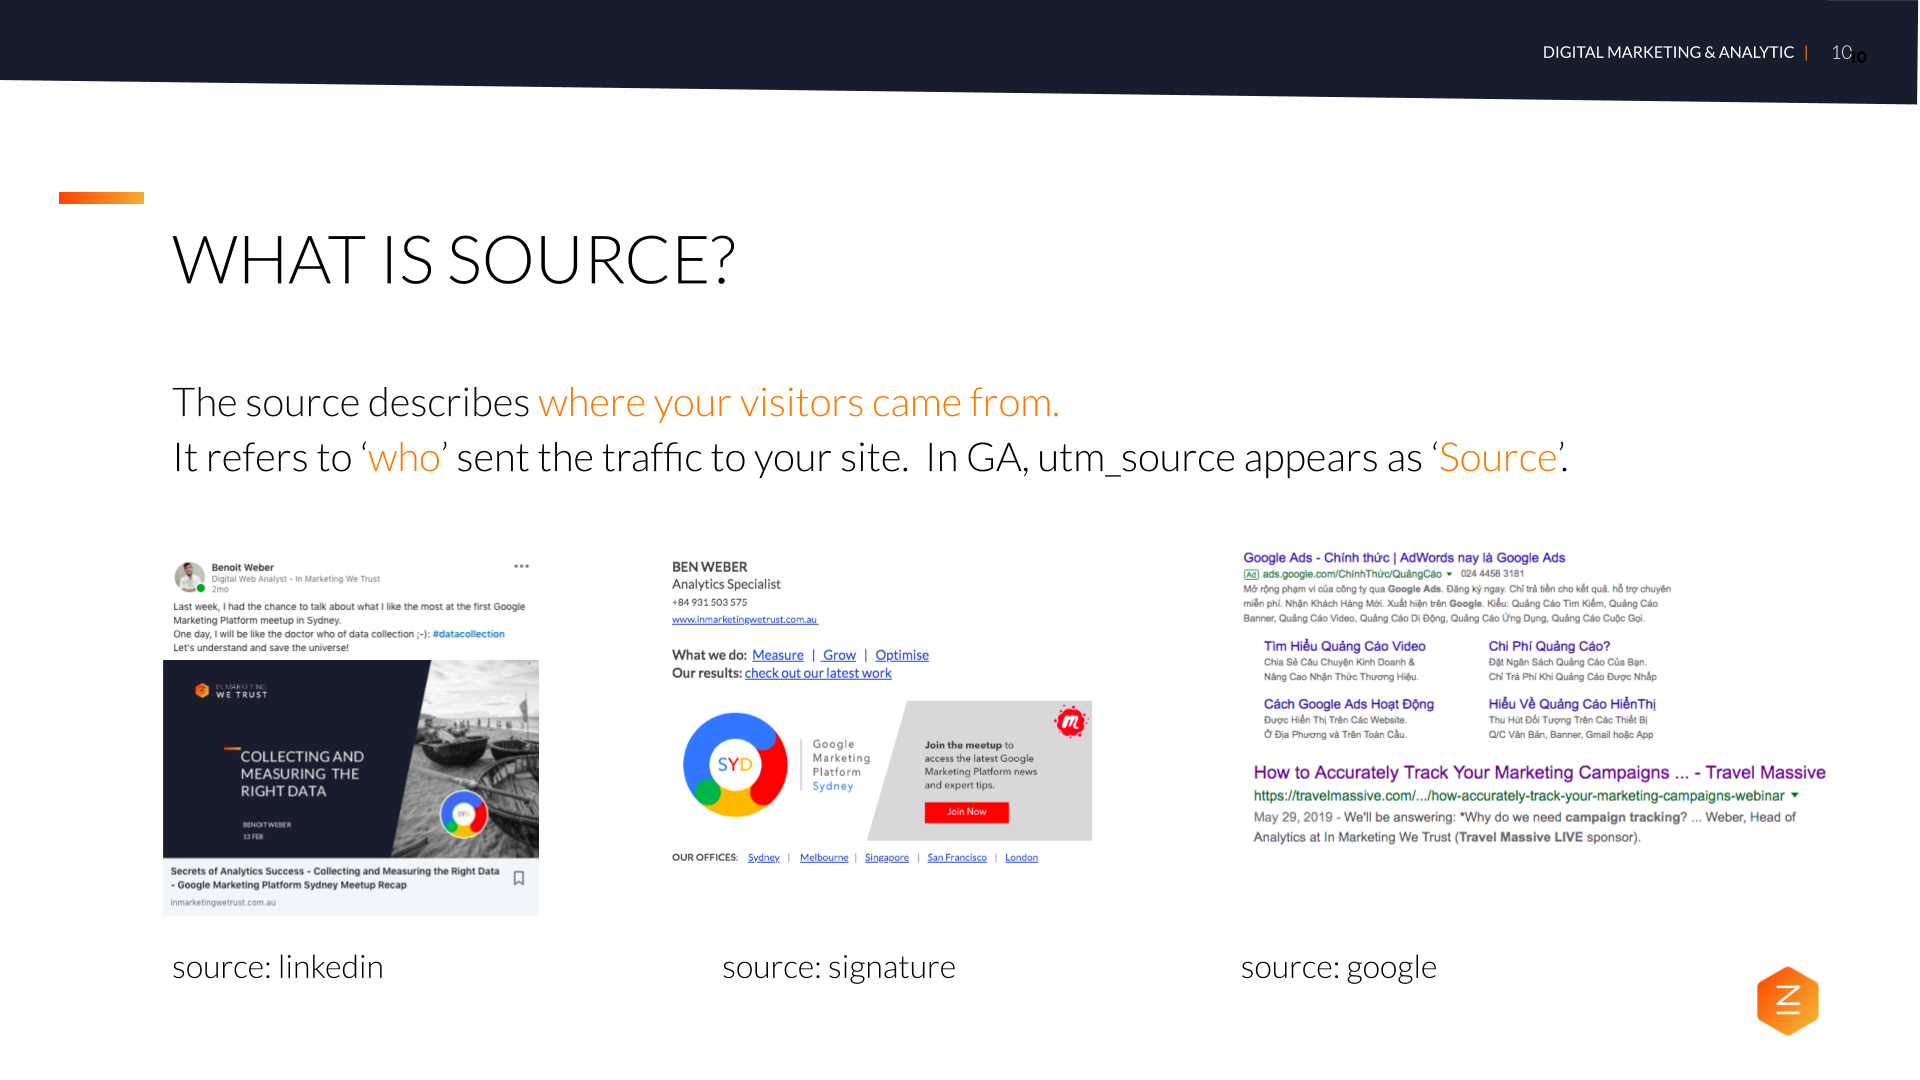 What is source - How to Accurately Track Marketing Campaigns in Google Analytics